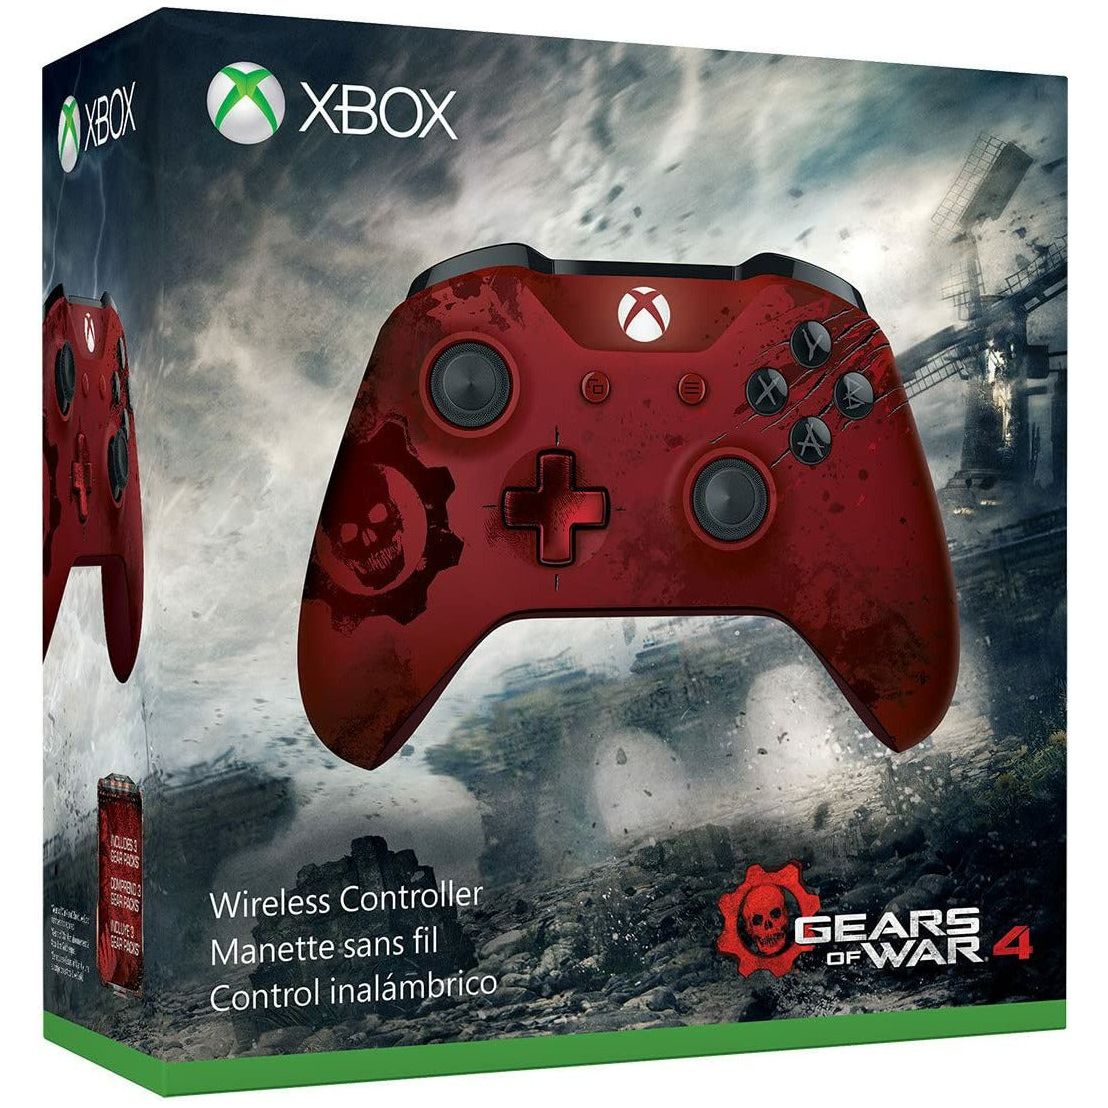 XBOX One Official Wireless Controller - Gears of War 4 Edition (In Box)